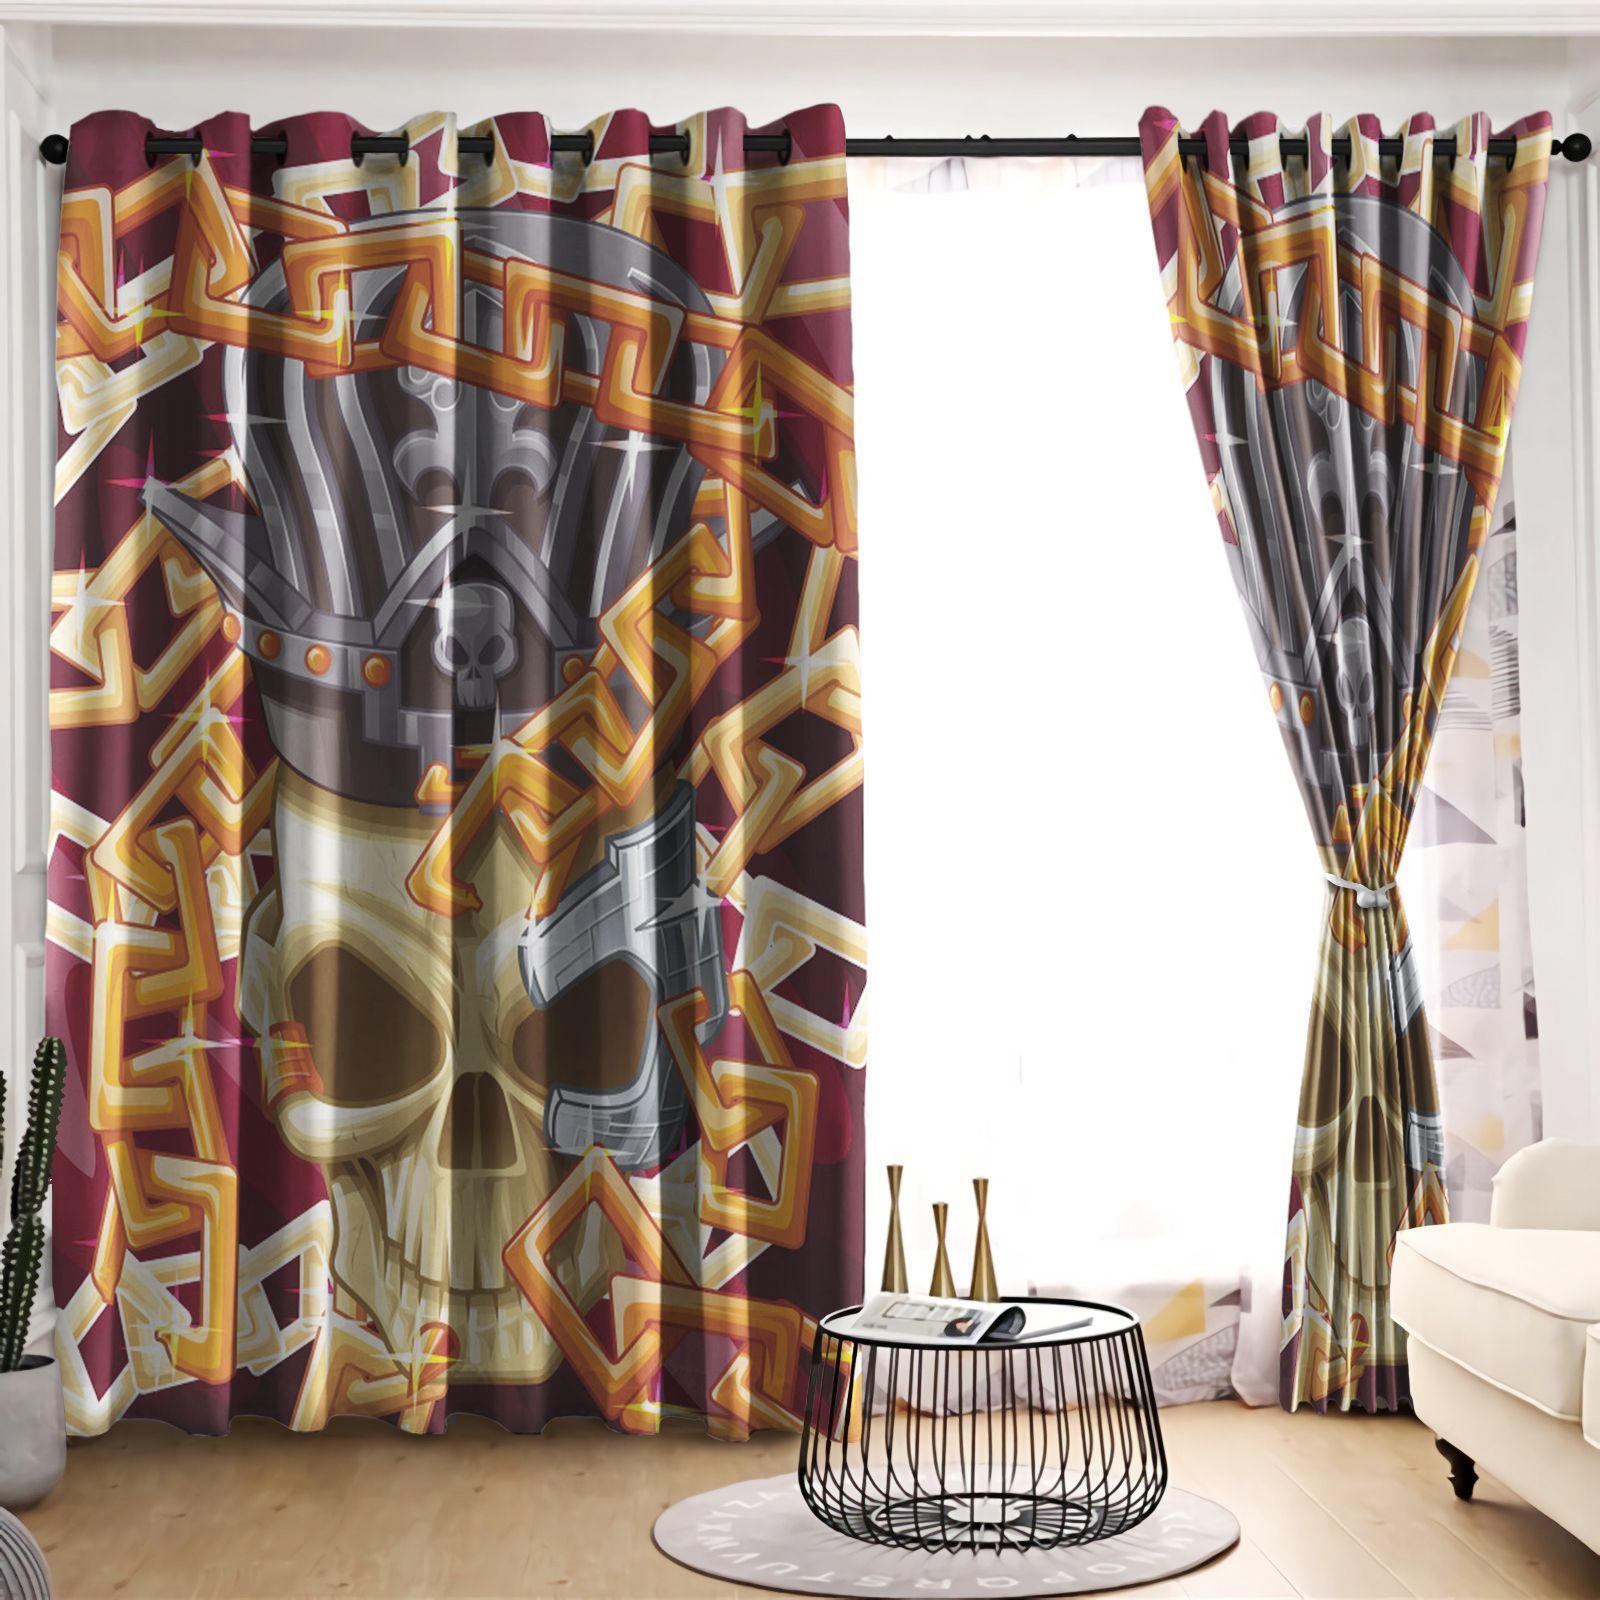 King Skull Golden Chain Pattern Printed Window Curtain Home Decor